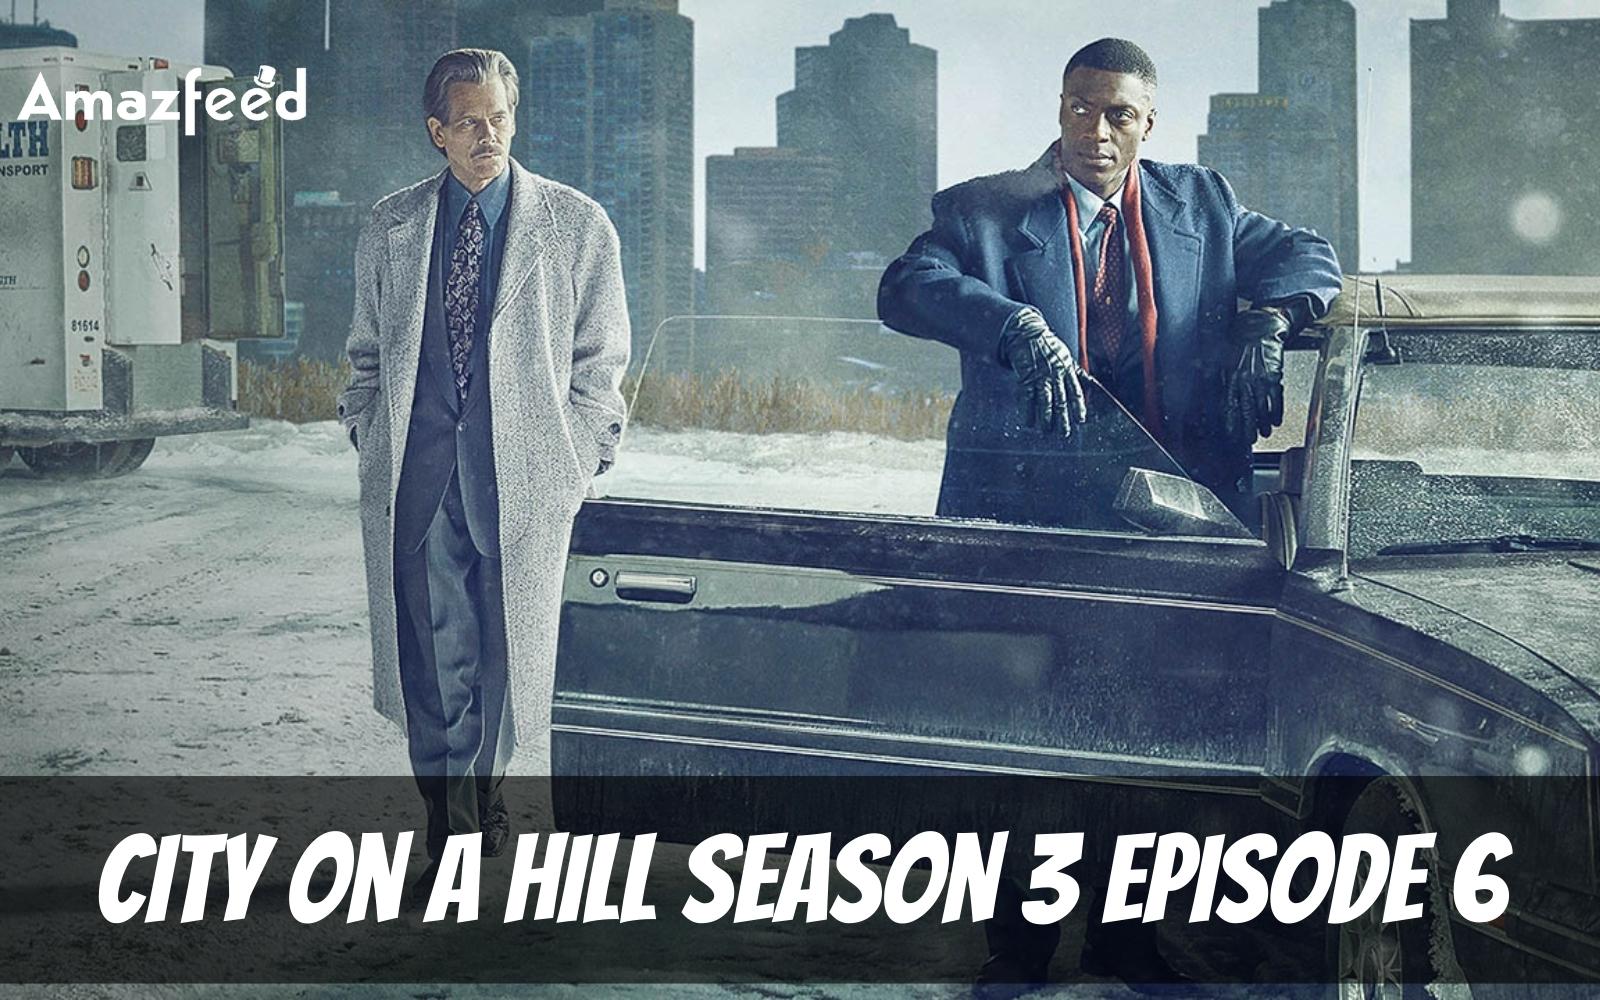 City on a Hill Season 3 Episode 6 ⇒ Countdown, Release Date, Spoilers, Recap, Cast & Where to Watch